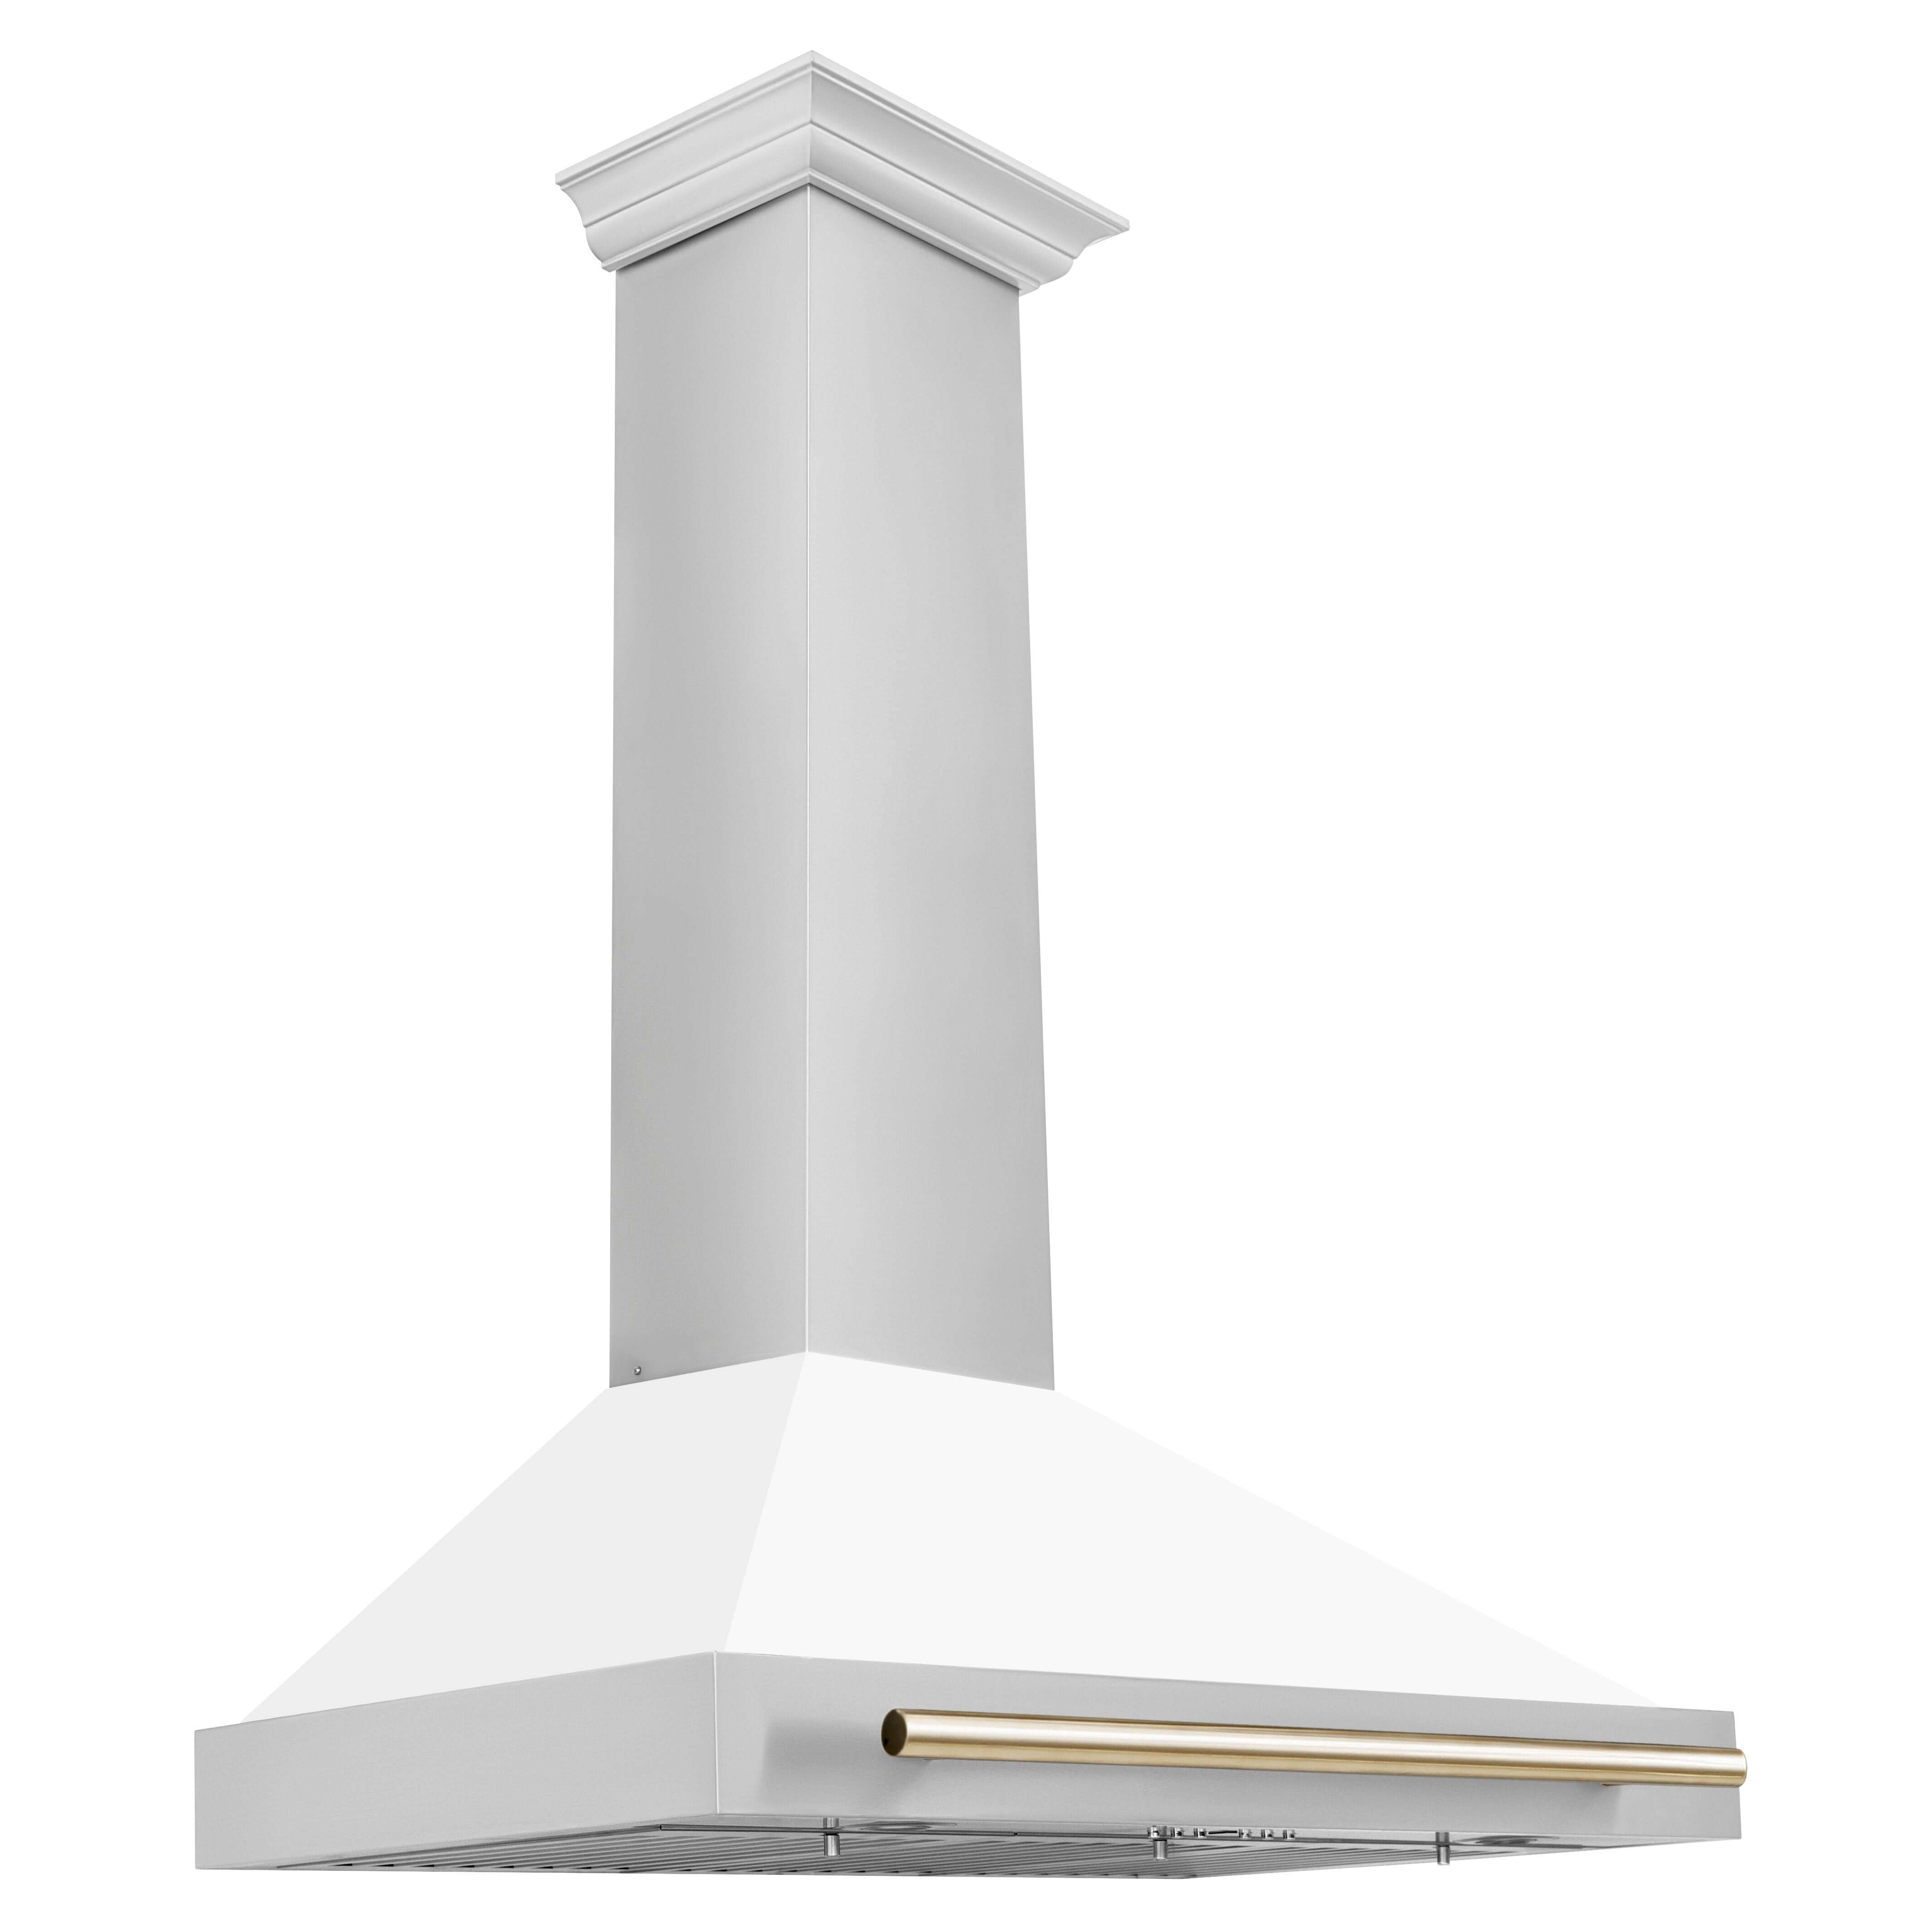 ZLINE Autograph Edition 36 in. Stainless Steel Range Hood with White Matte Shell and Accents (KB4STZ-WM36) Stainless Steel with Polished Gold Accents